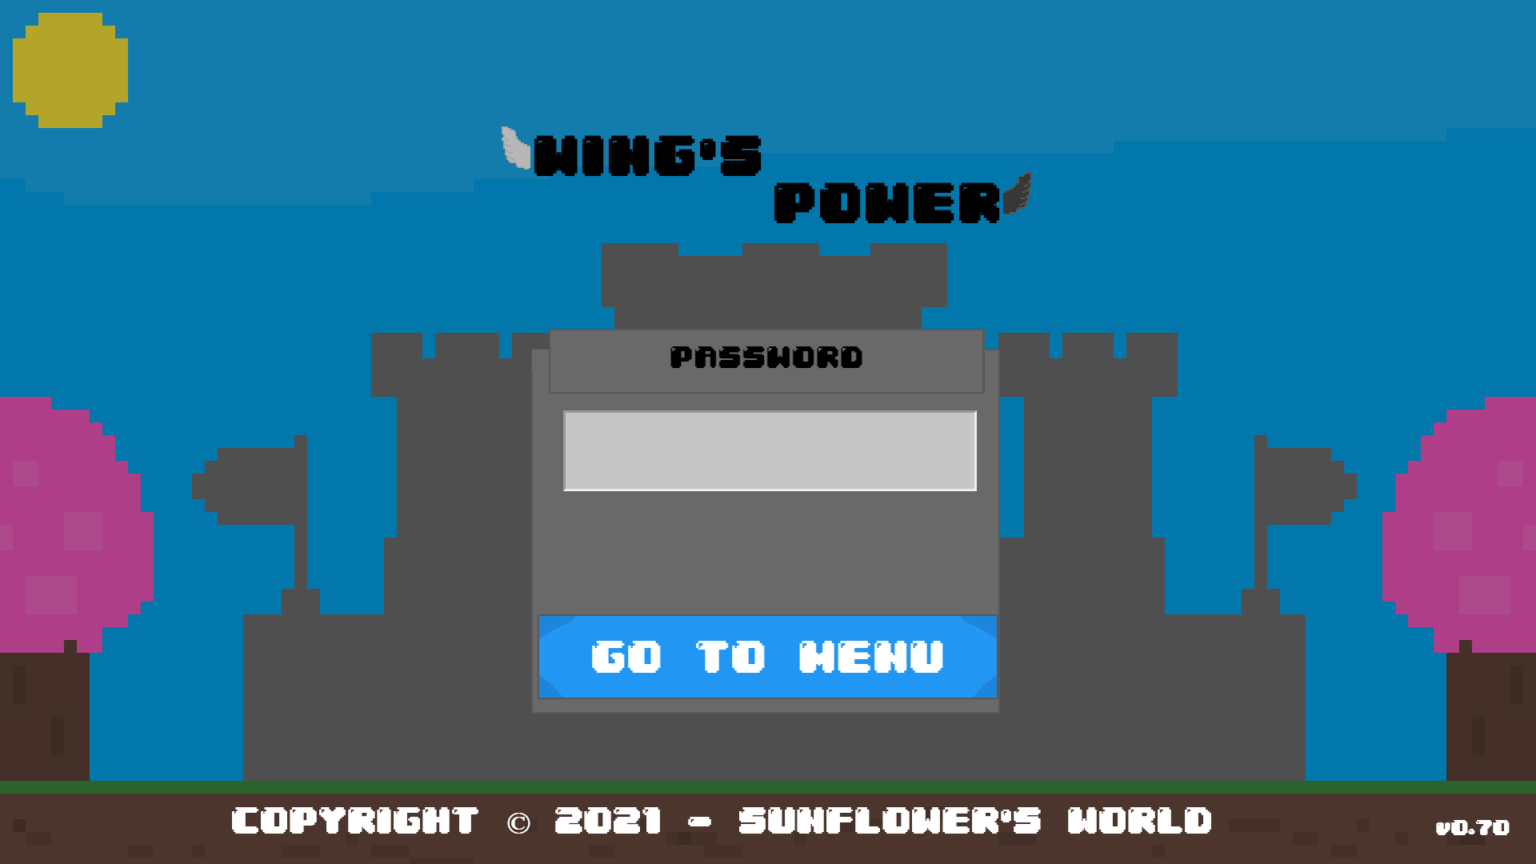 wings-power-password-19.02.2021-1536x864.png